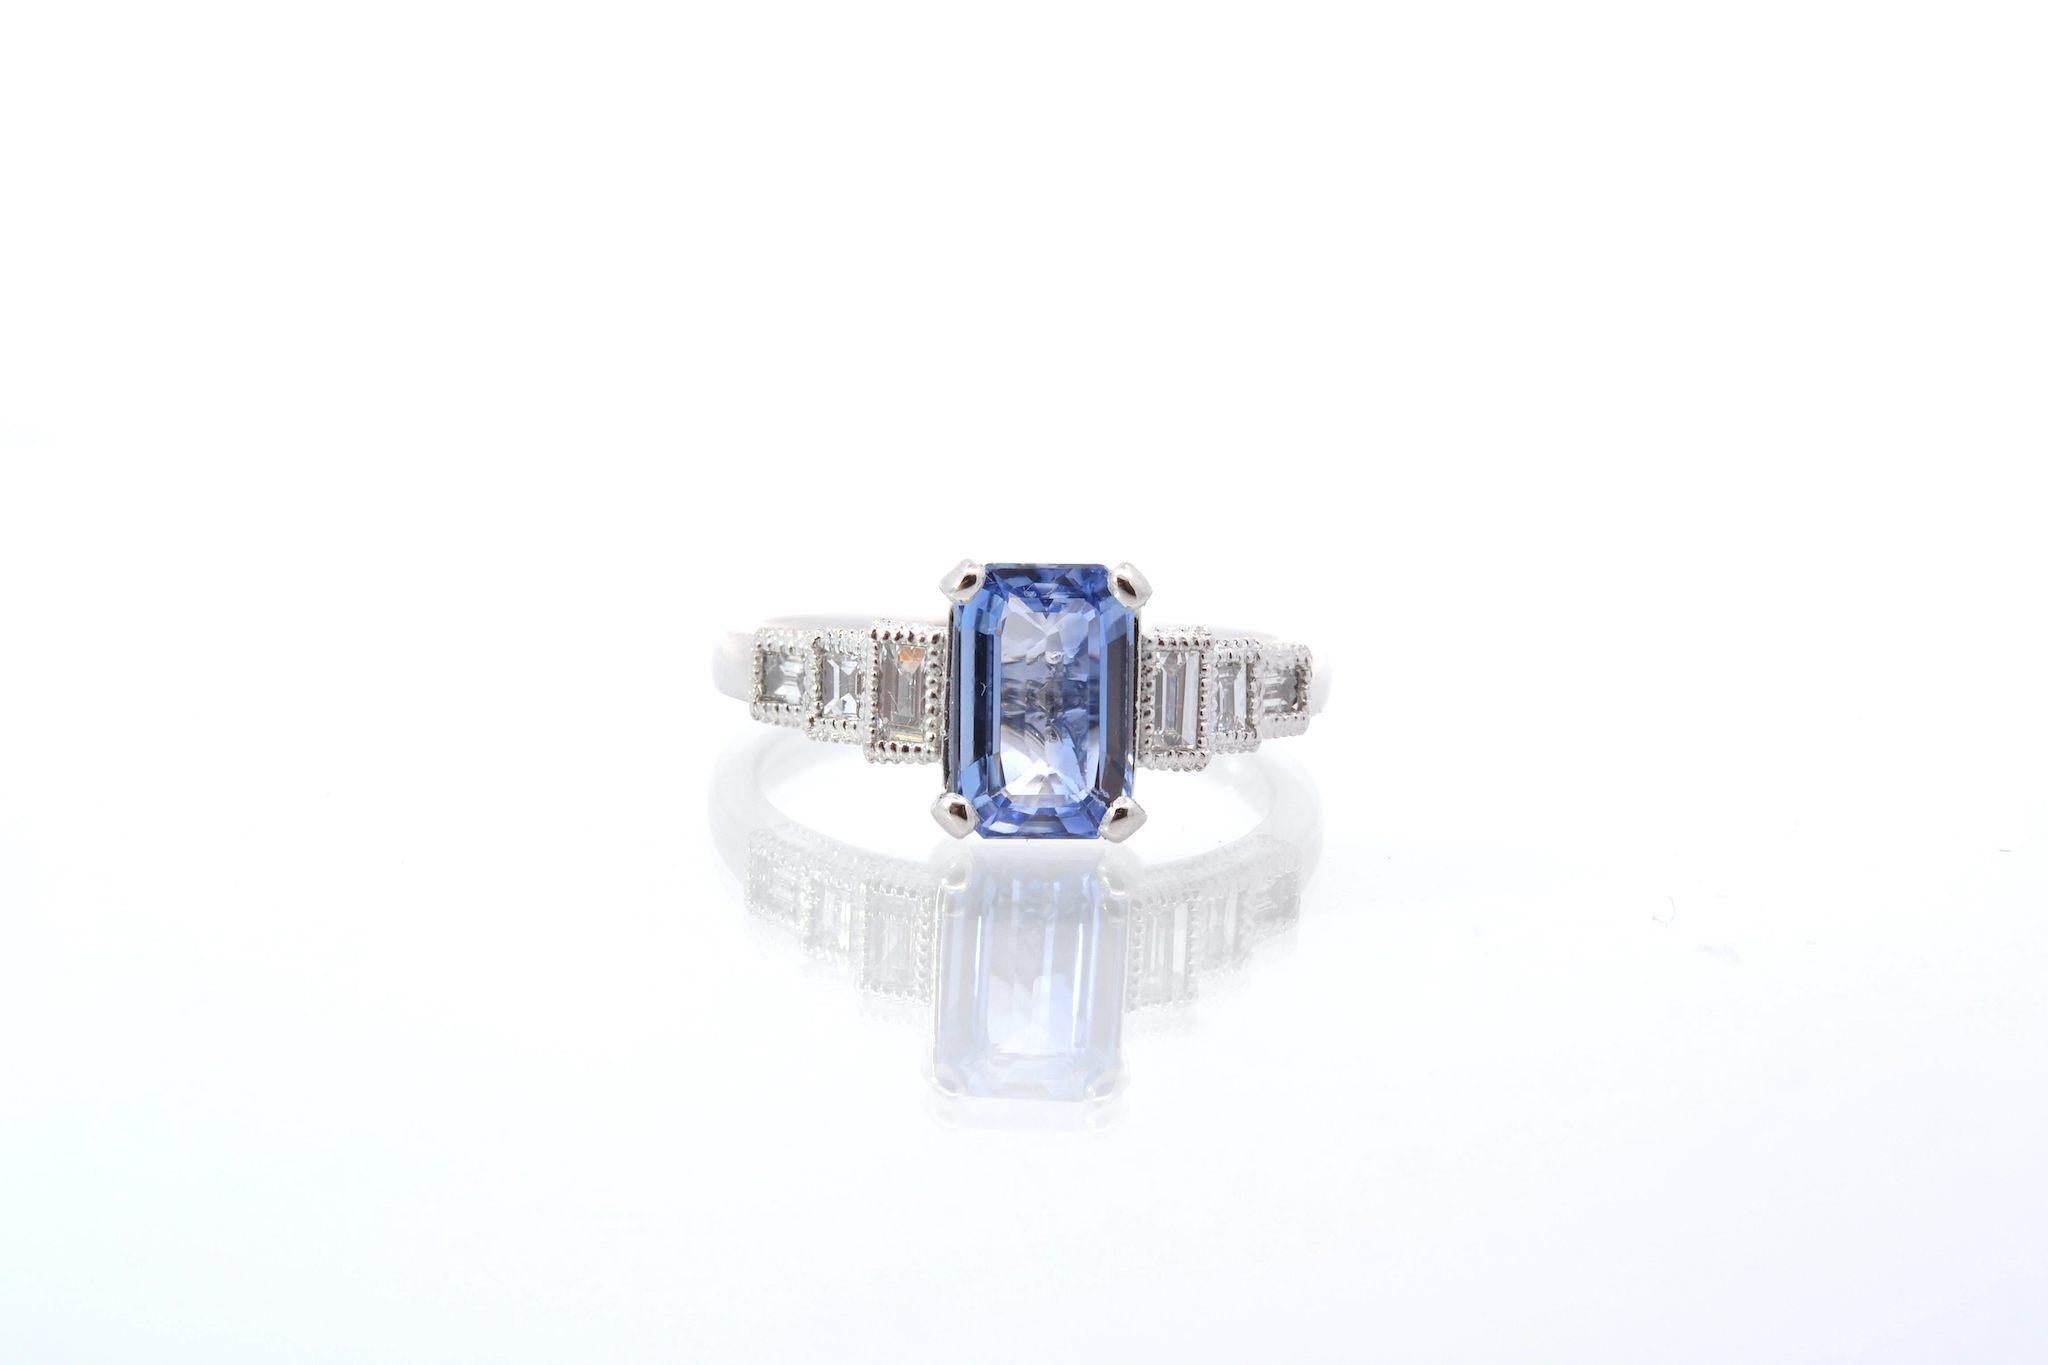 Stones: 1 sapphire of 1.46cts, 6 baguette diamonds: 0.20ct
Material: Platinum
Dimensions: 8mm
Weight: 5g
Period: Recent art deco style
Size: 50 (free sizing)
Certificate
Ref. : 25423 25446